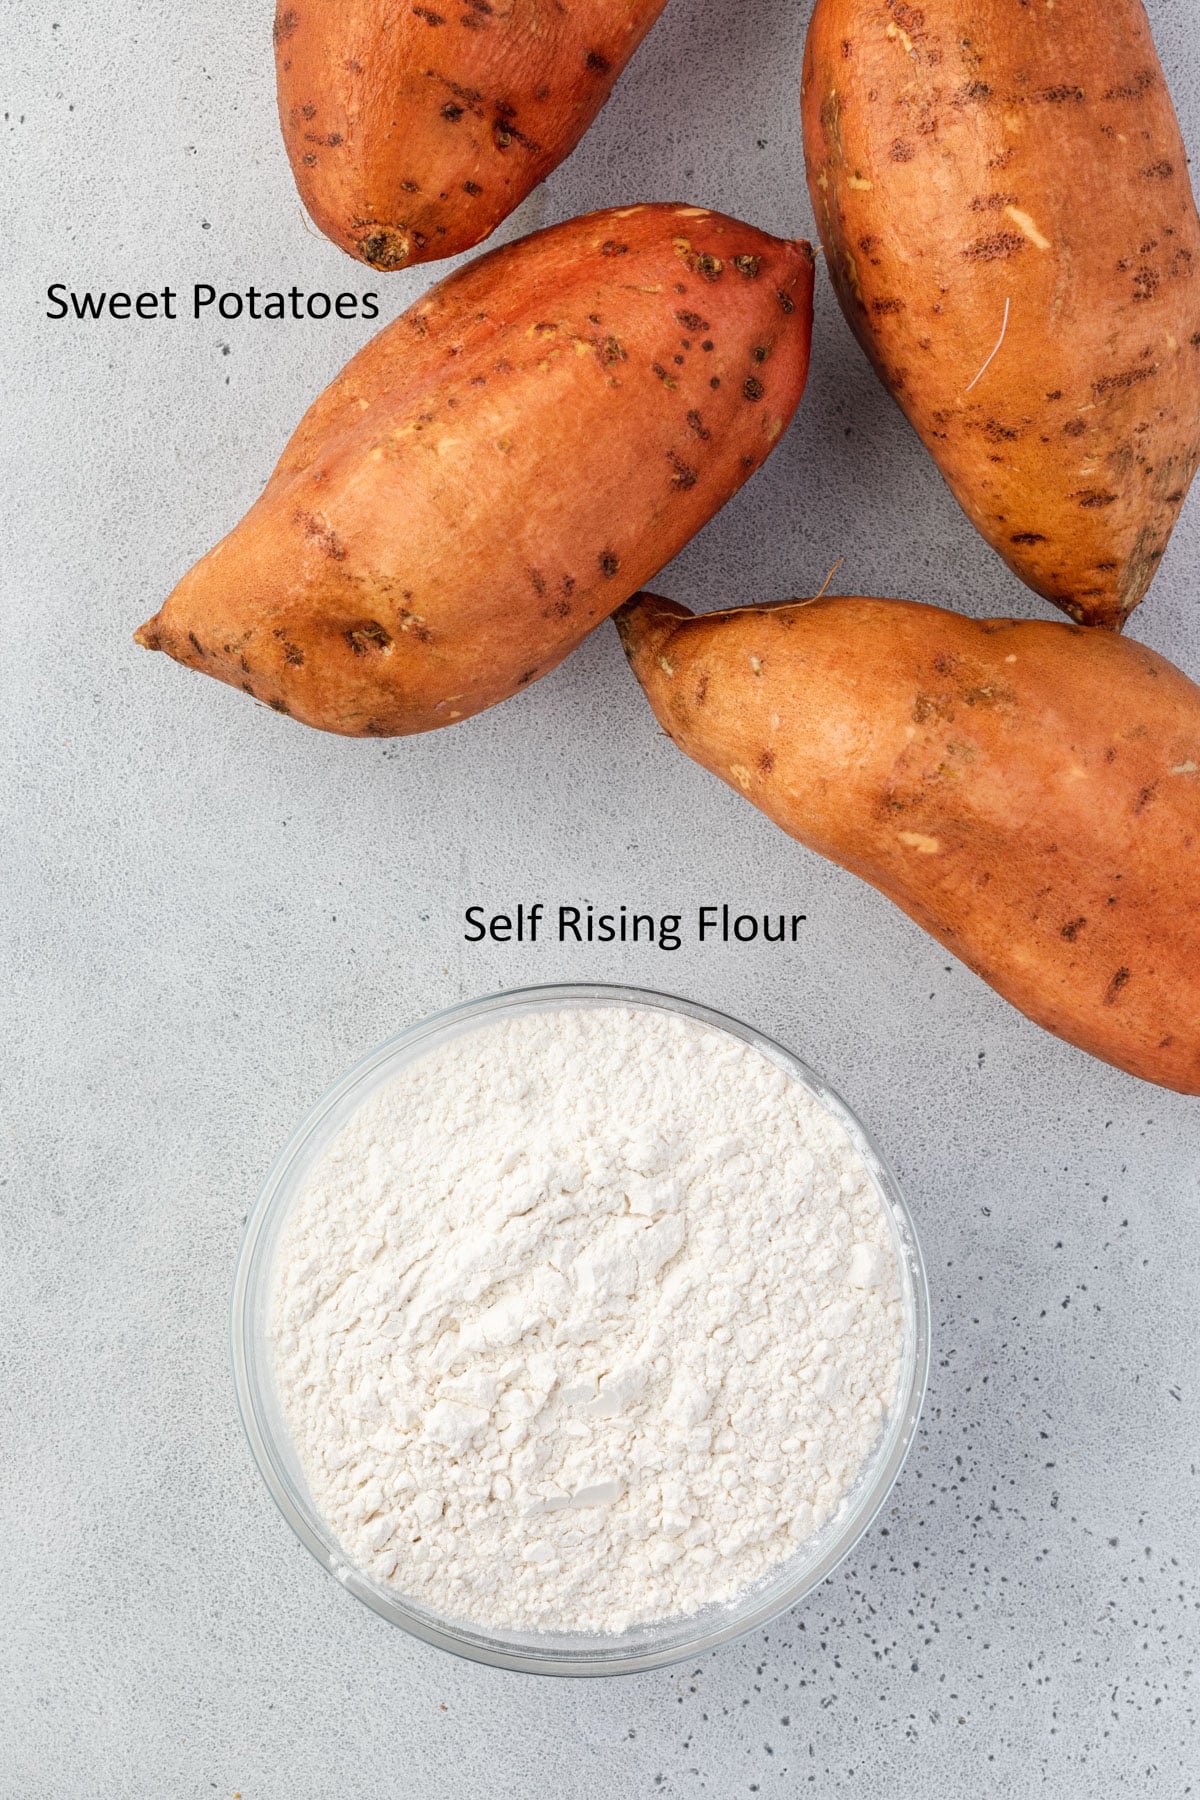 4 sweet potatoes and a bowl of self-rising flour.